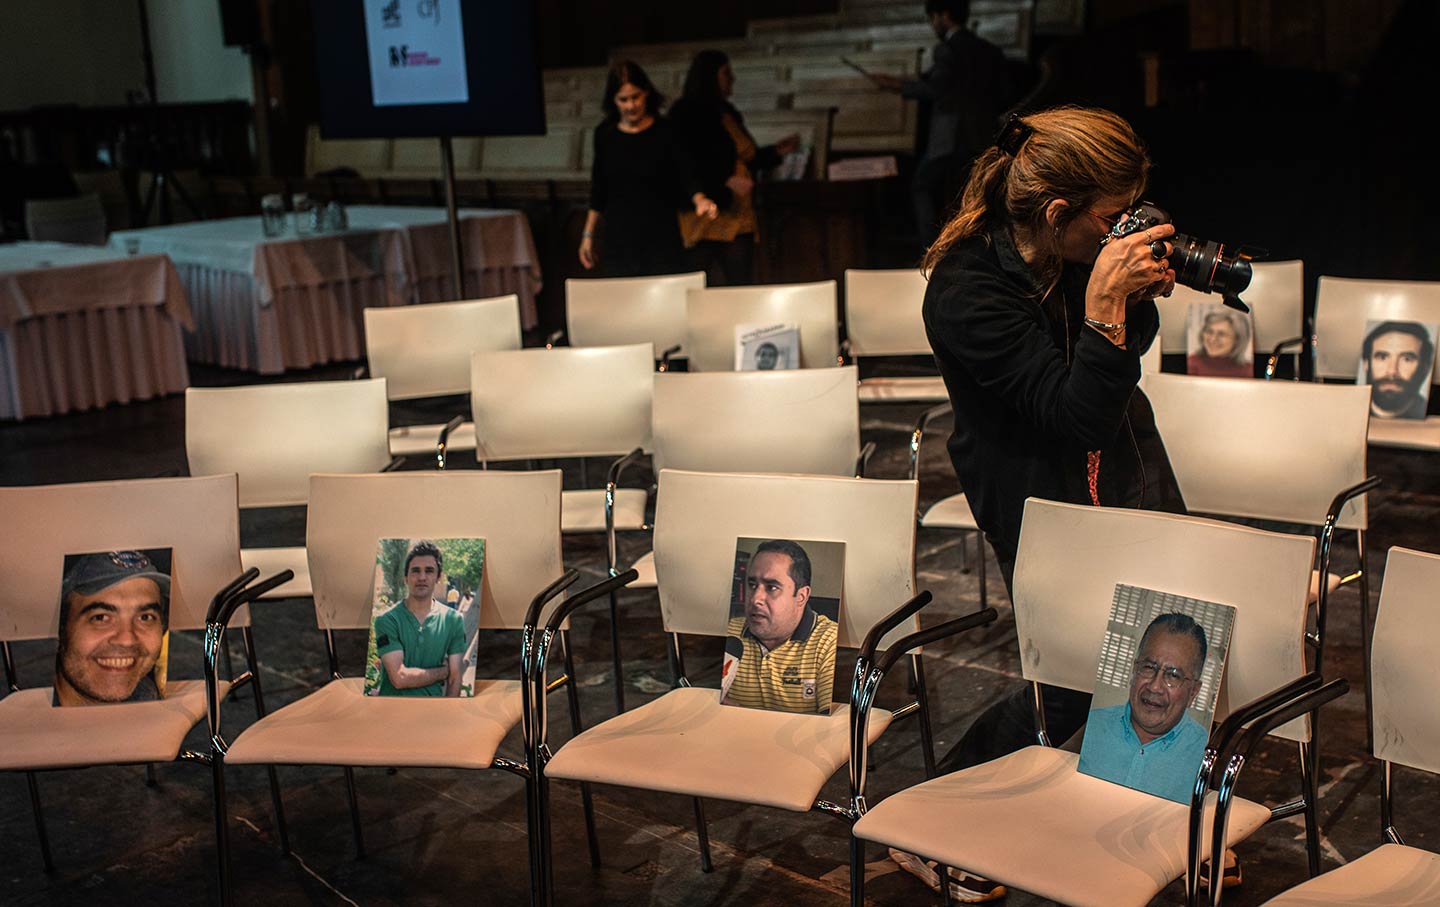 A photographer takes photos of chairs with images of assassinated journalists on them.